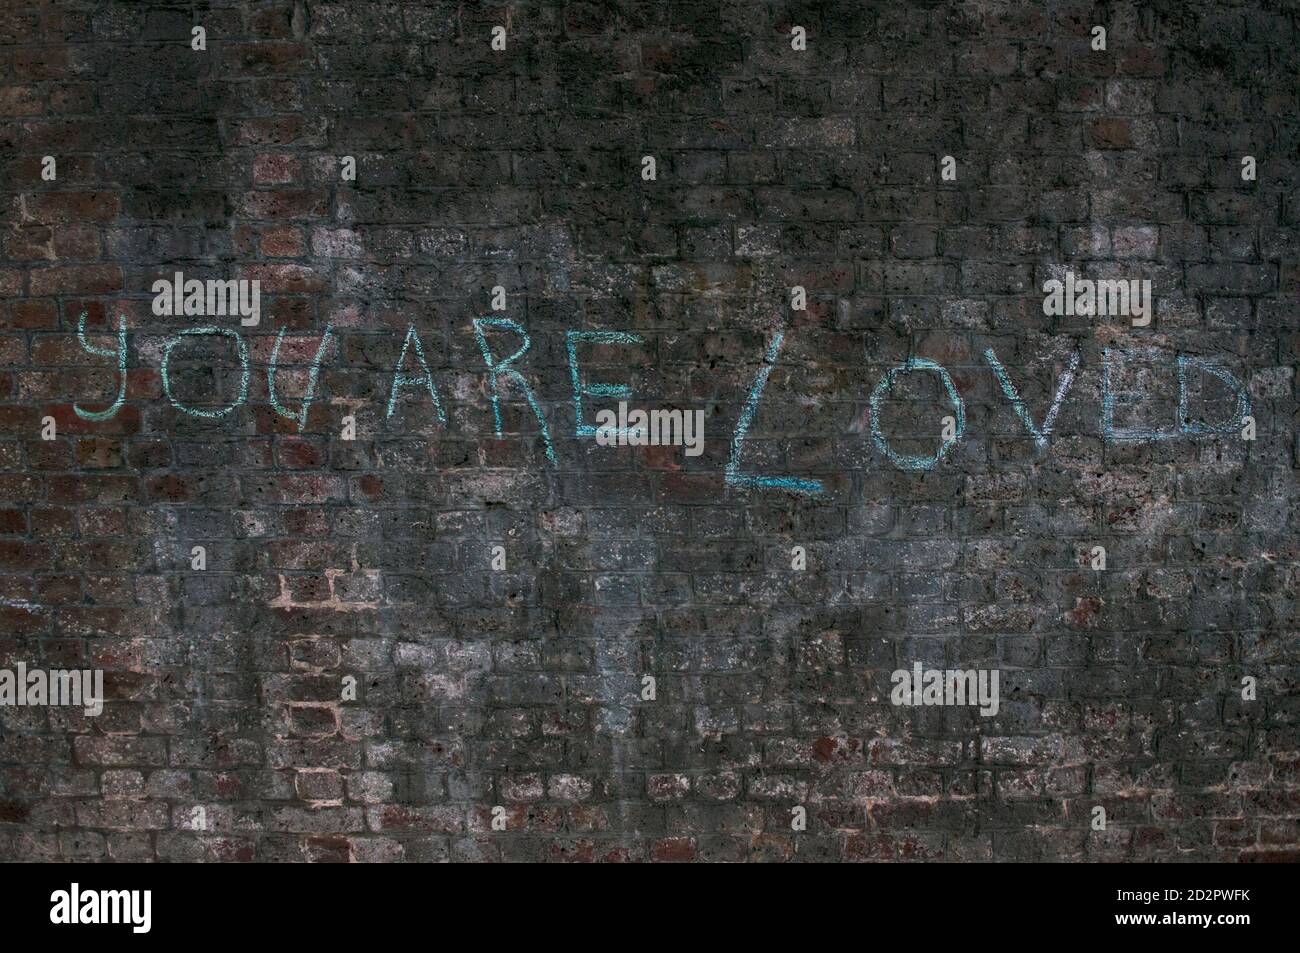 You Are Loved Written On A Dirty Brick Wall In London, UK Stock Photo